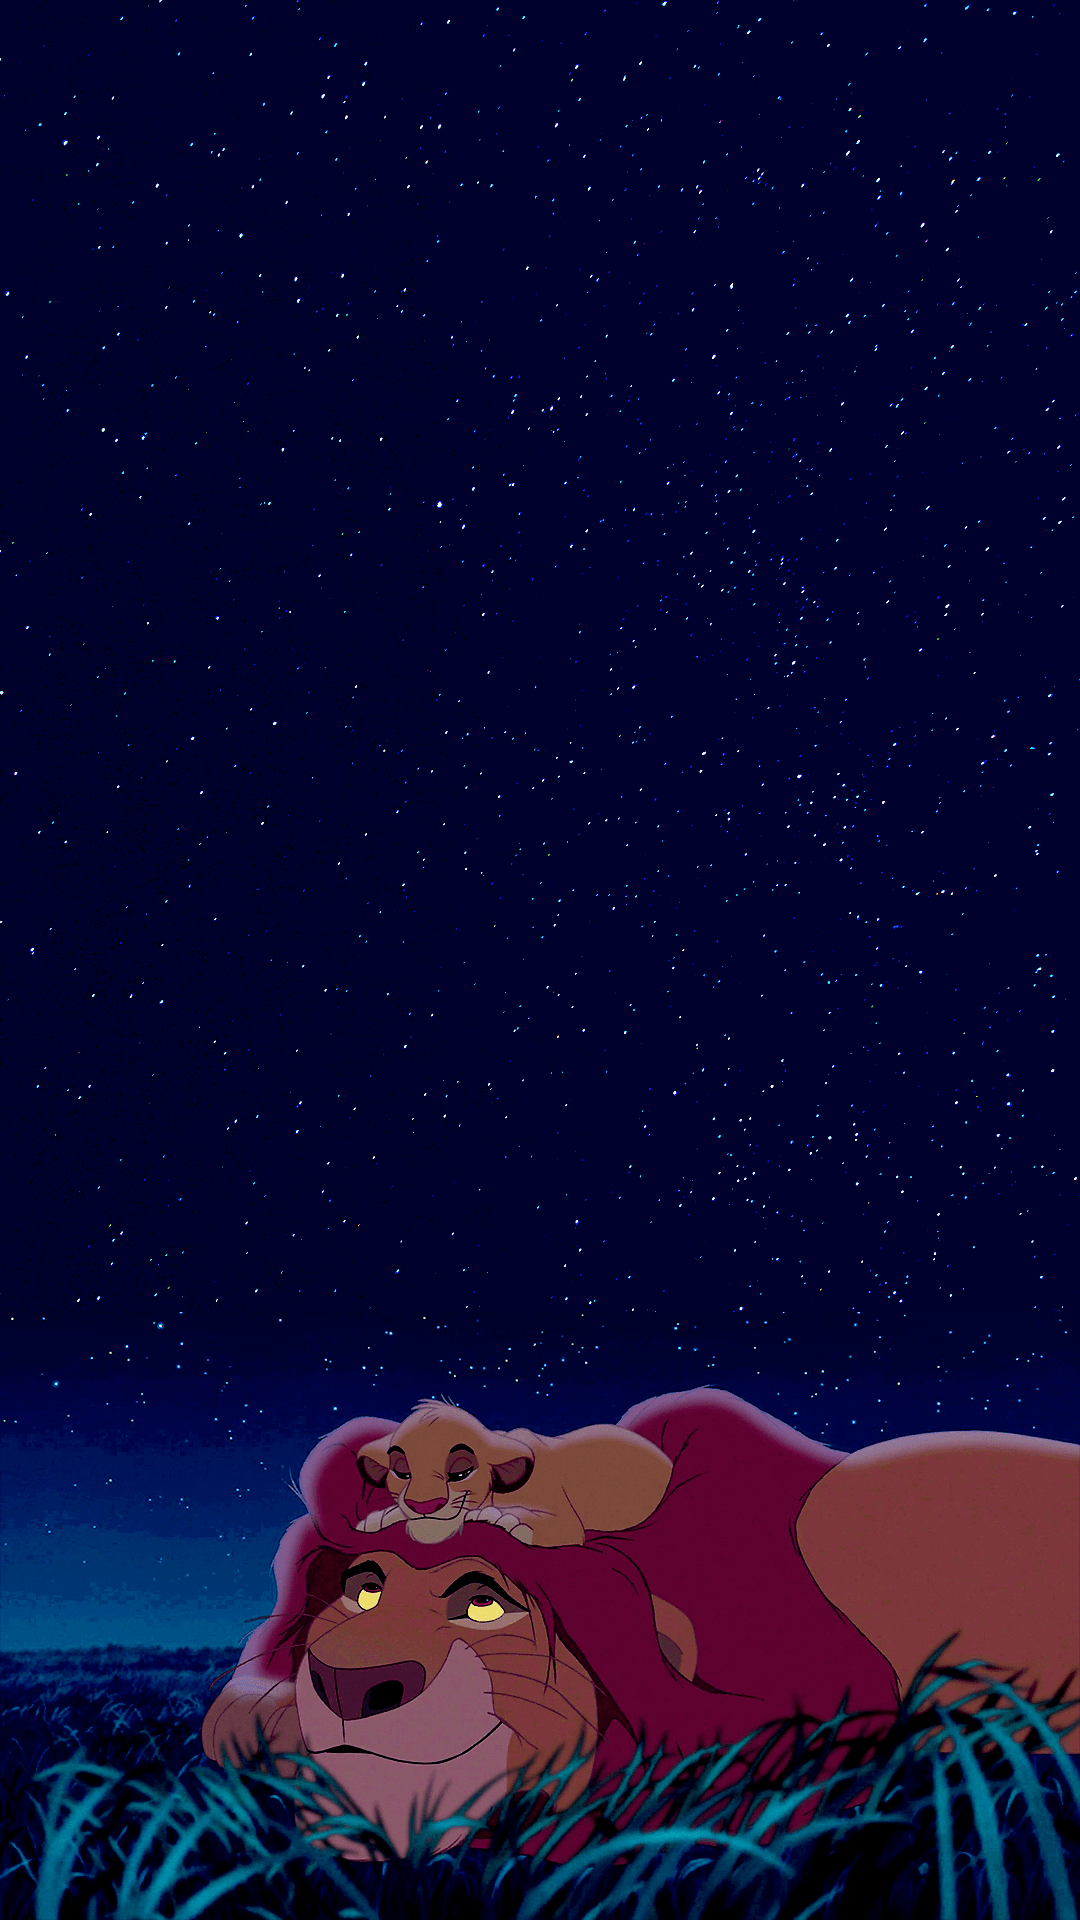 A lion laying down in the grass with stars above - Lion, The Lion King